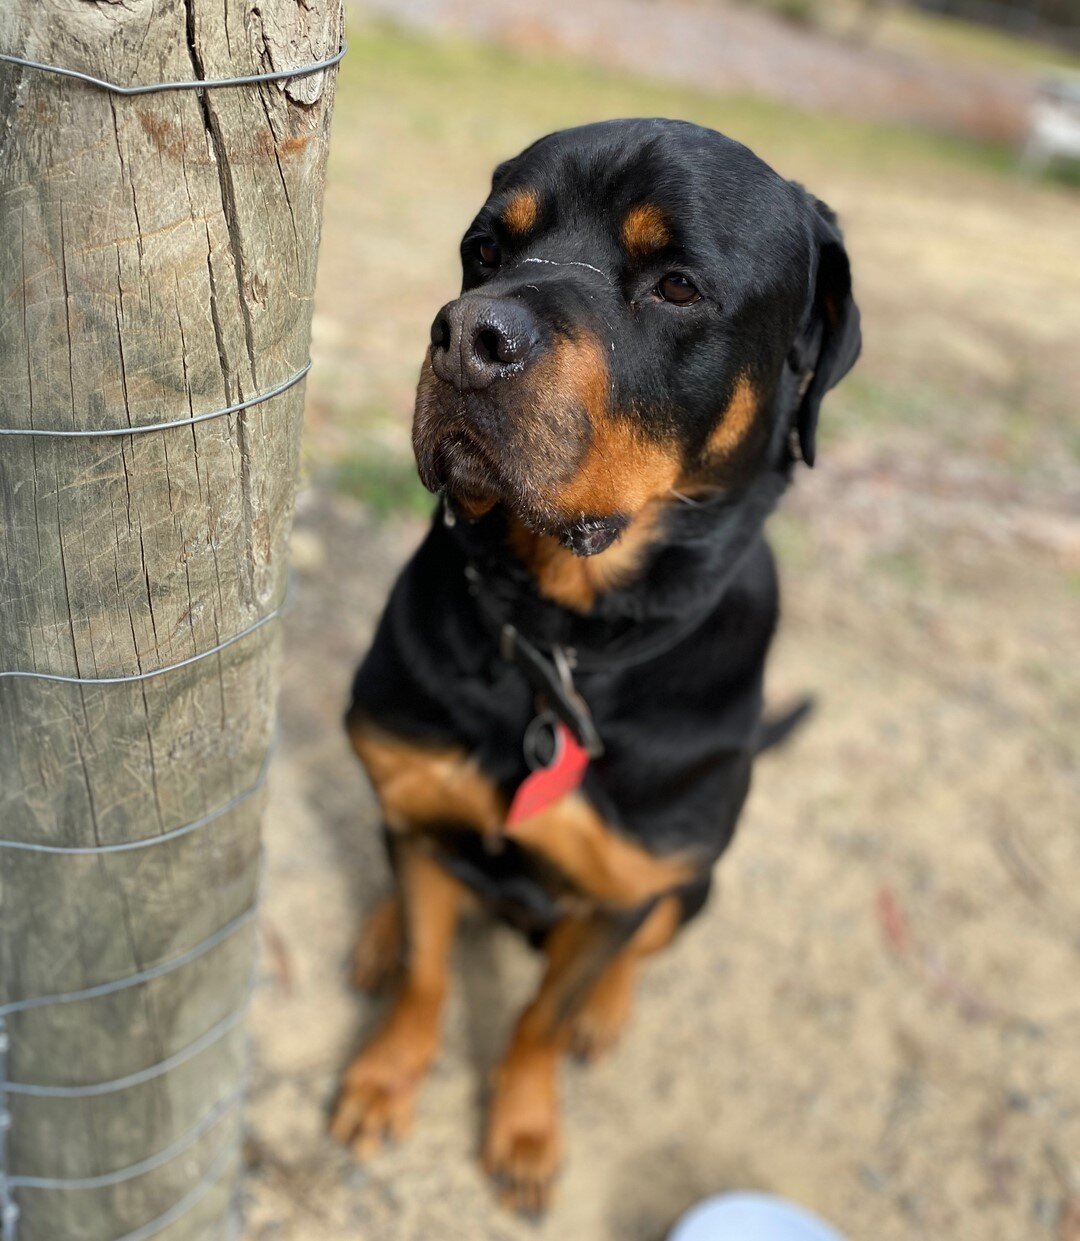 Boss - the most gentle giant ! 👑 ⠀⠀⠀⠀⠀⠀⠀⠀⠀
He loves his stays at Wagging School HQ, as well as a photo shoot or 20! 😉🥰⠀⠀⠀⠀⠀⠀⠀⠀⠀
⠀⠀⠀⠀⠀⠀⠀⠀⠀
⠀⠀⠀⠀⠀⠀⠀⠀⠀
⠀⠀⠀⠀⠀⠀⠀⠀⠀
⠀⠀⠀⠀⠀⠀⠀⠀⠀
⠀⠀⠀⠀⠀⠀⠀⠀⠀
⠀⠀⠀⠀⠀⠀⠀⠀⠀
⠀⠀⠀⠀⠀⠀⠀⠀⠀
- #Rottweiler #rotty  #dogsofinstagram #dogstagra